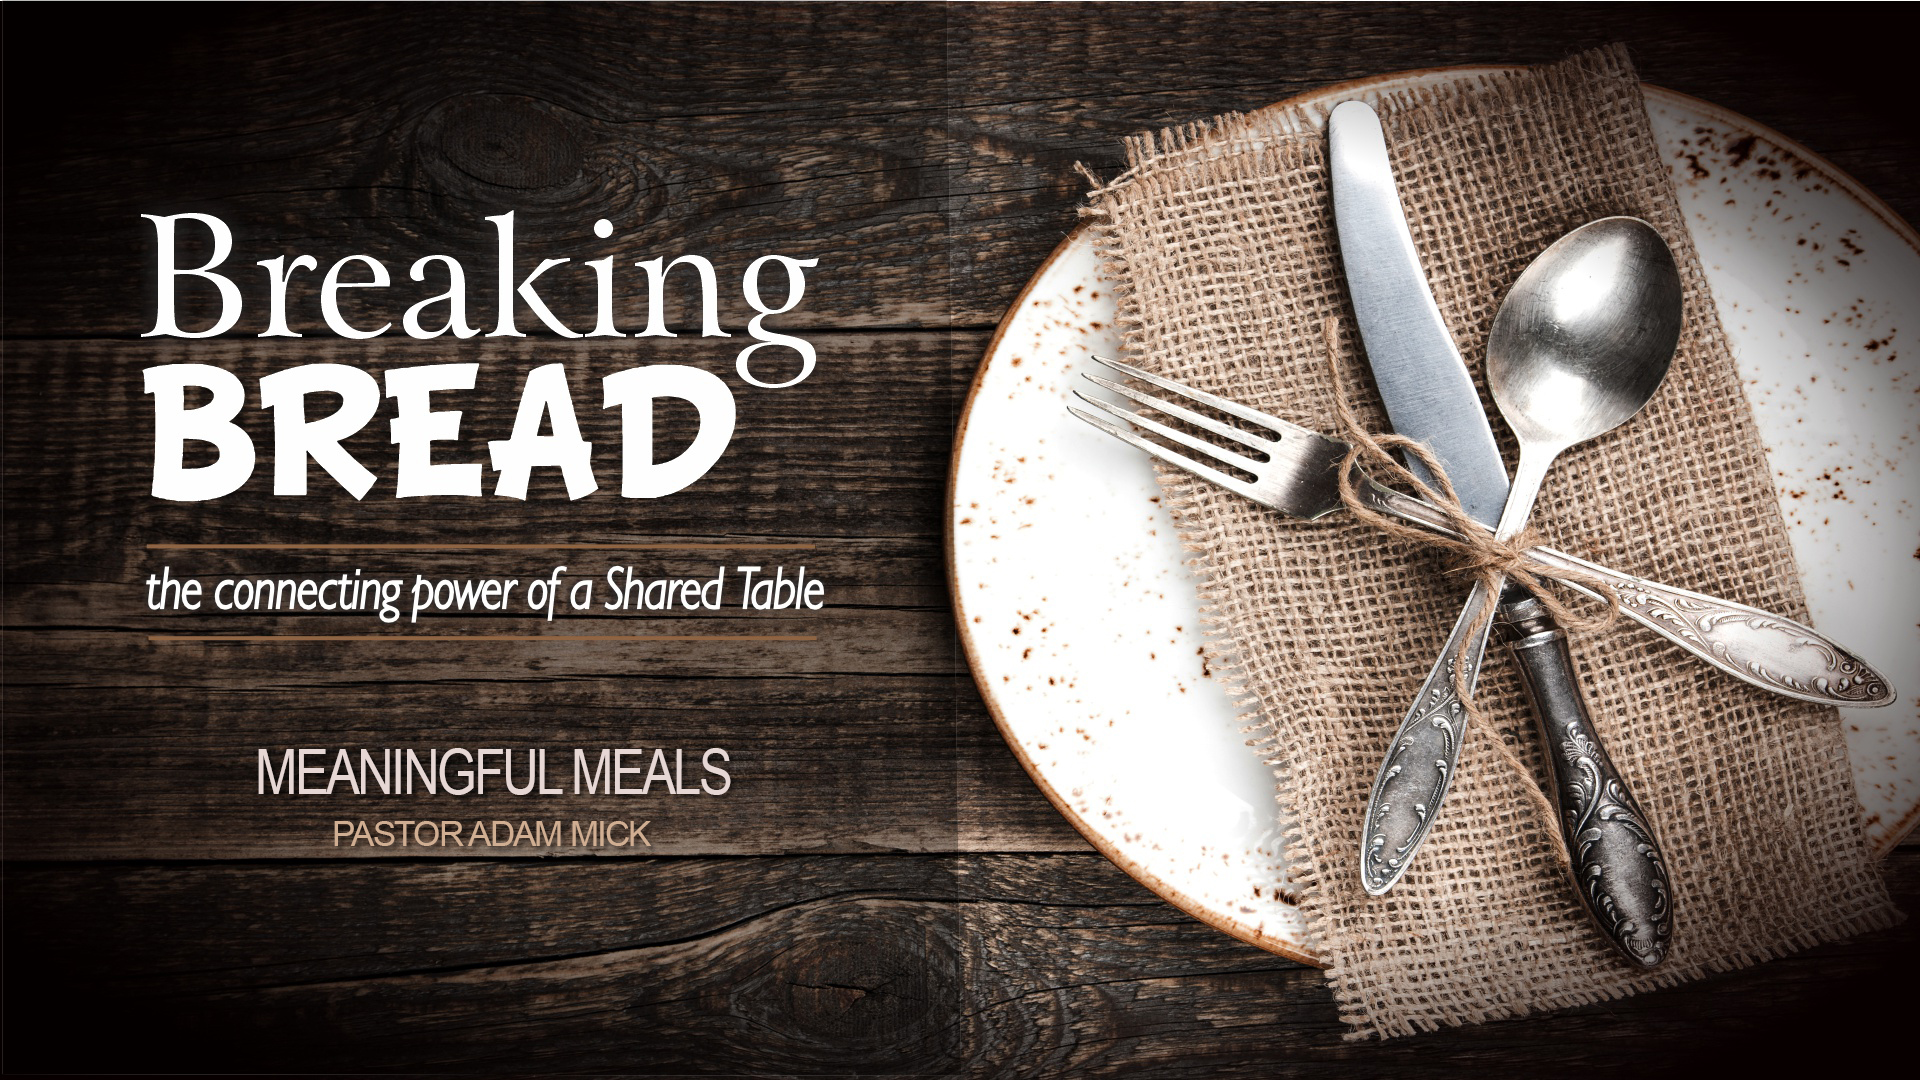 Watch Meaningful Meals